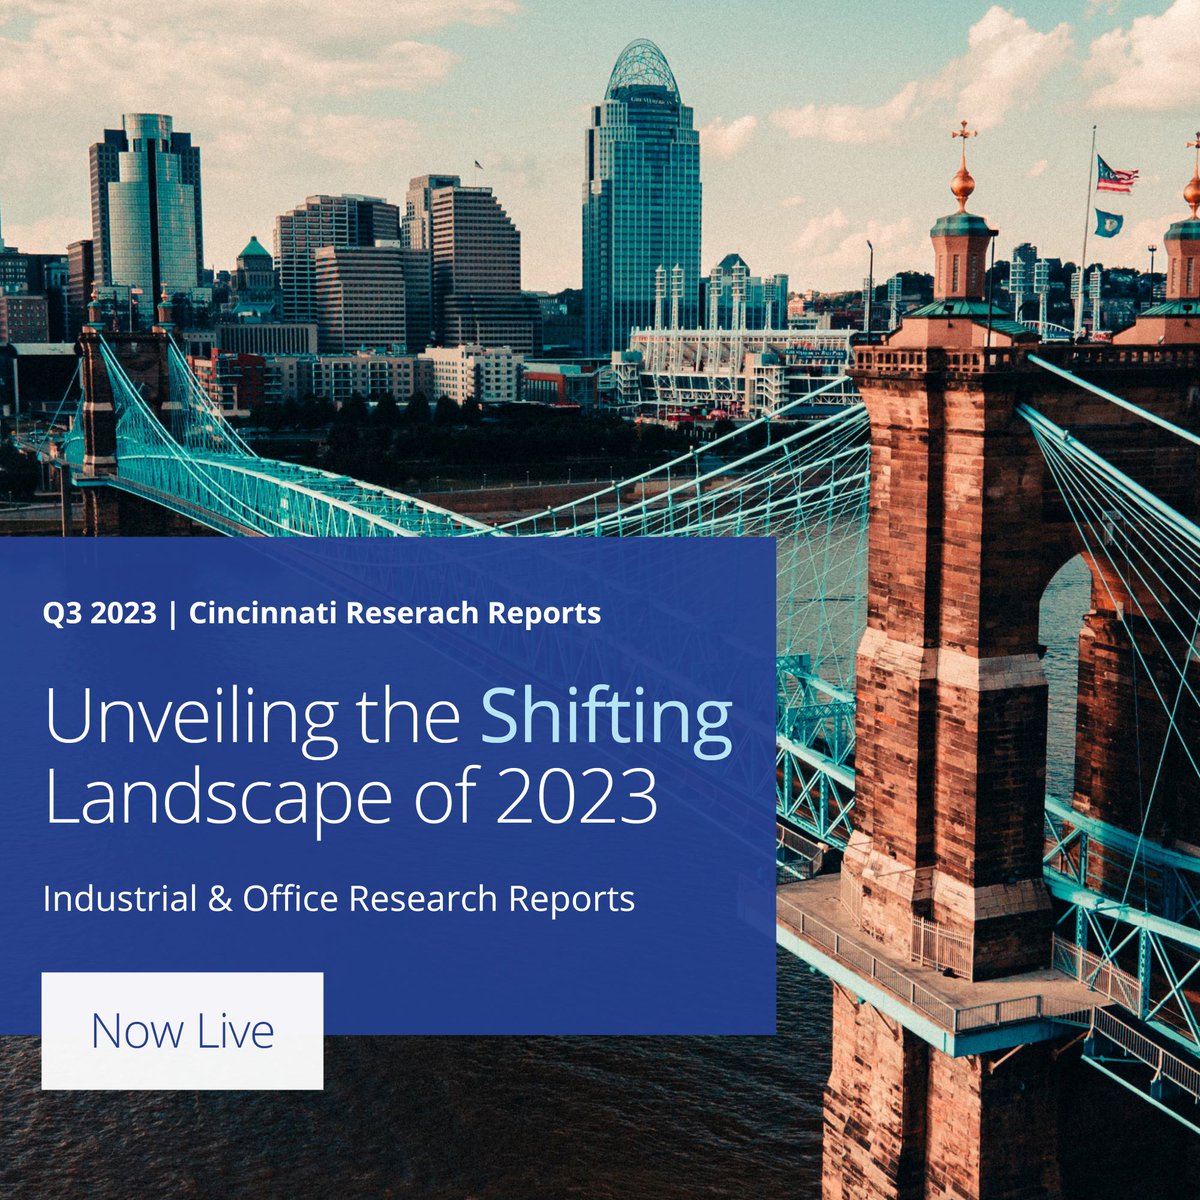 Just In! Explore our Q3 Industrial and Office Research Reports. Stay ahead of the curve in Commercial Real Estate! colliers.com/en/research#q=…] #RealEstateTrends #Q3Reports #ColliersCincy #CRE #Colliers